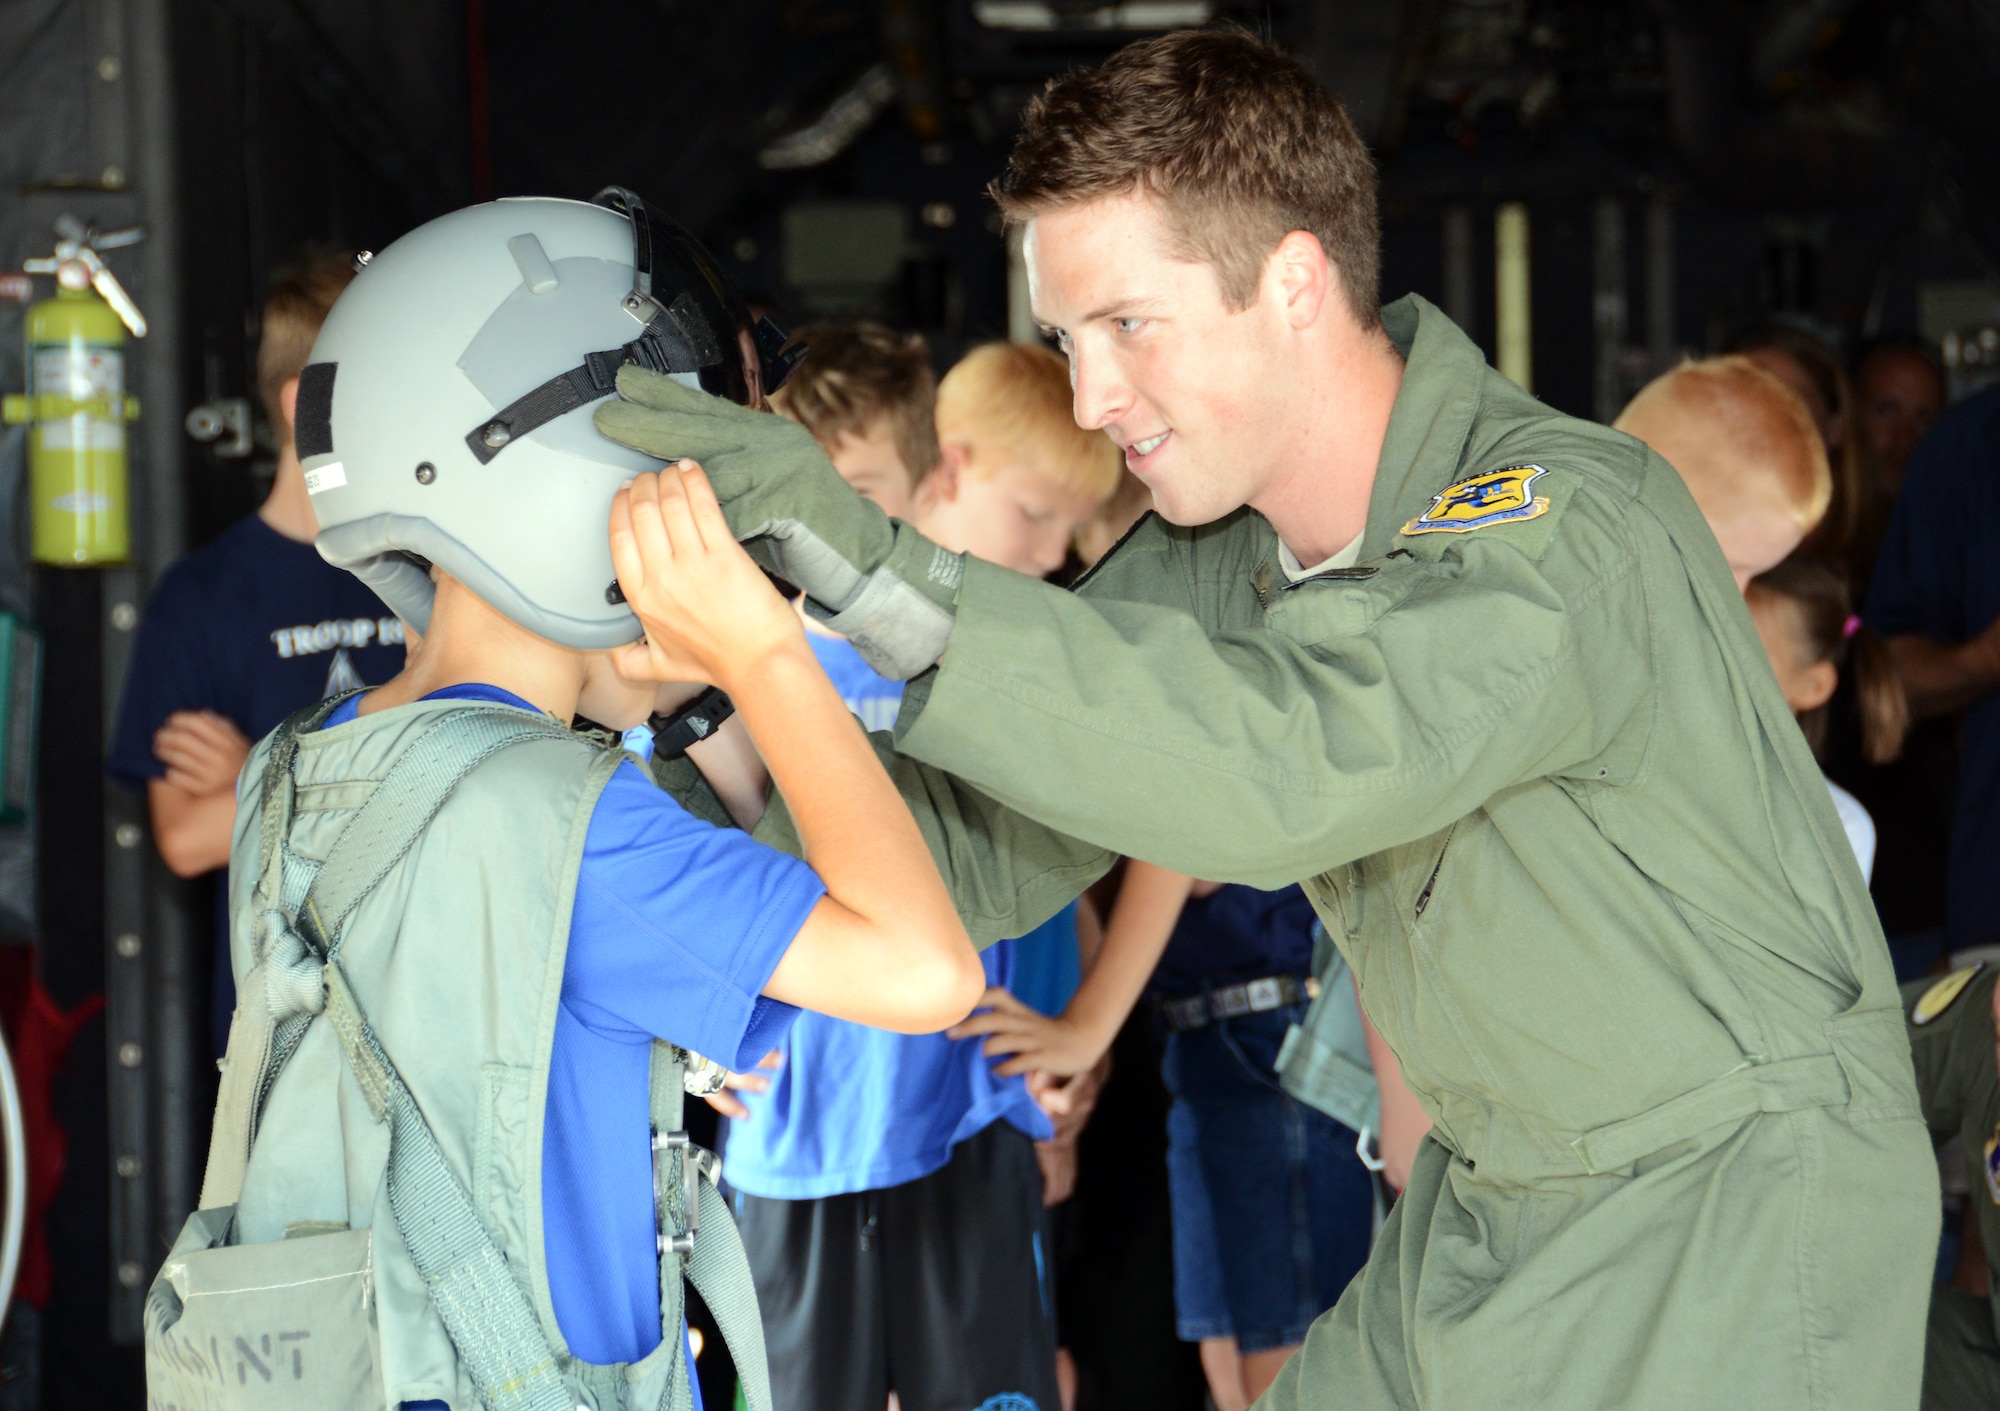 Staff Sgt. Daniel Haynes, a loadmaster with the 118th Airlift Squadron, adjusts an aviation helmet on Cub Scout Blake Kamoen, 8, during a base tour at Bradley Air National Guard Base in East Granby, Conn., Aug. 4, 2014. Haynes later said that tours like these are part of the reason he joined the Air Force. (U.S. Air National Guard photo by Tech. Sgt. Joshua Mead/Released)